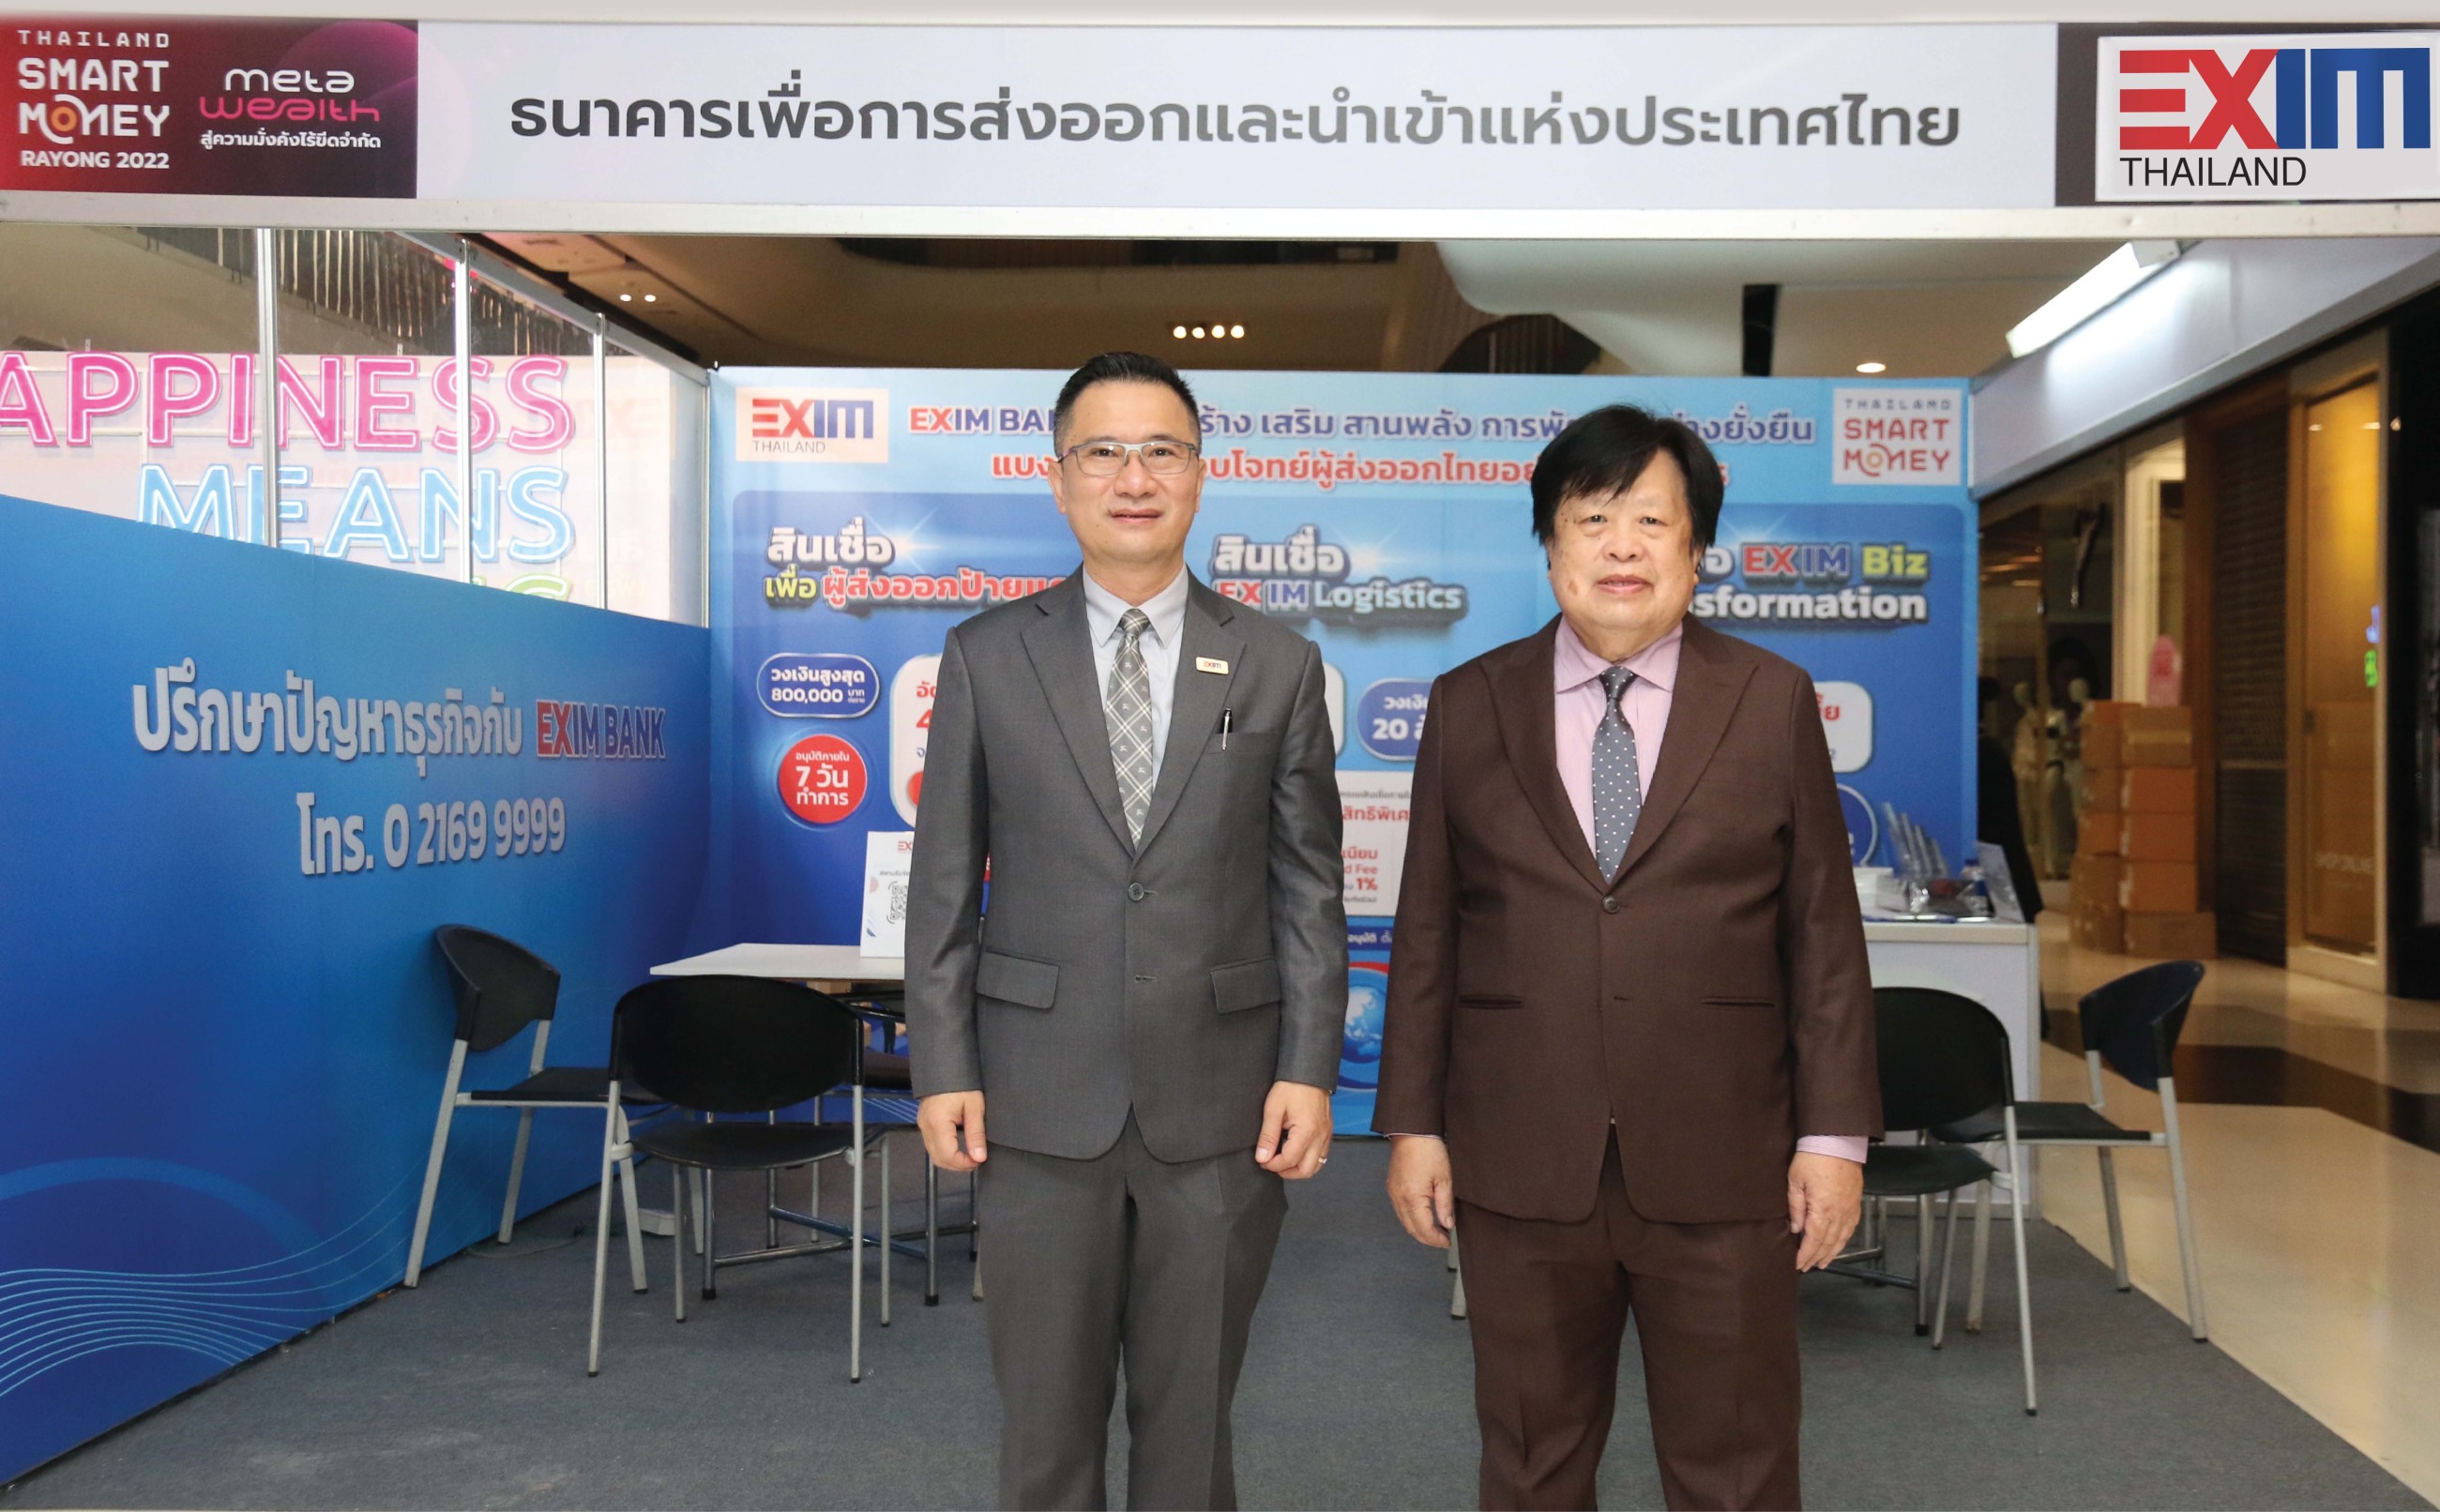 EXIM Thailand Opens Booth at Thailand Smart Money Rayong 2022